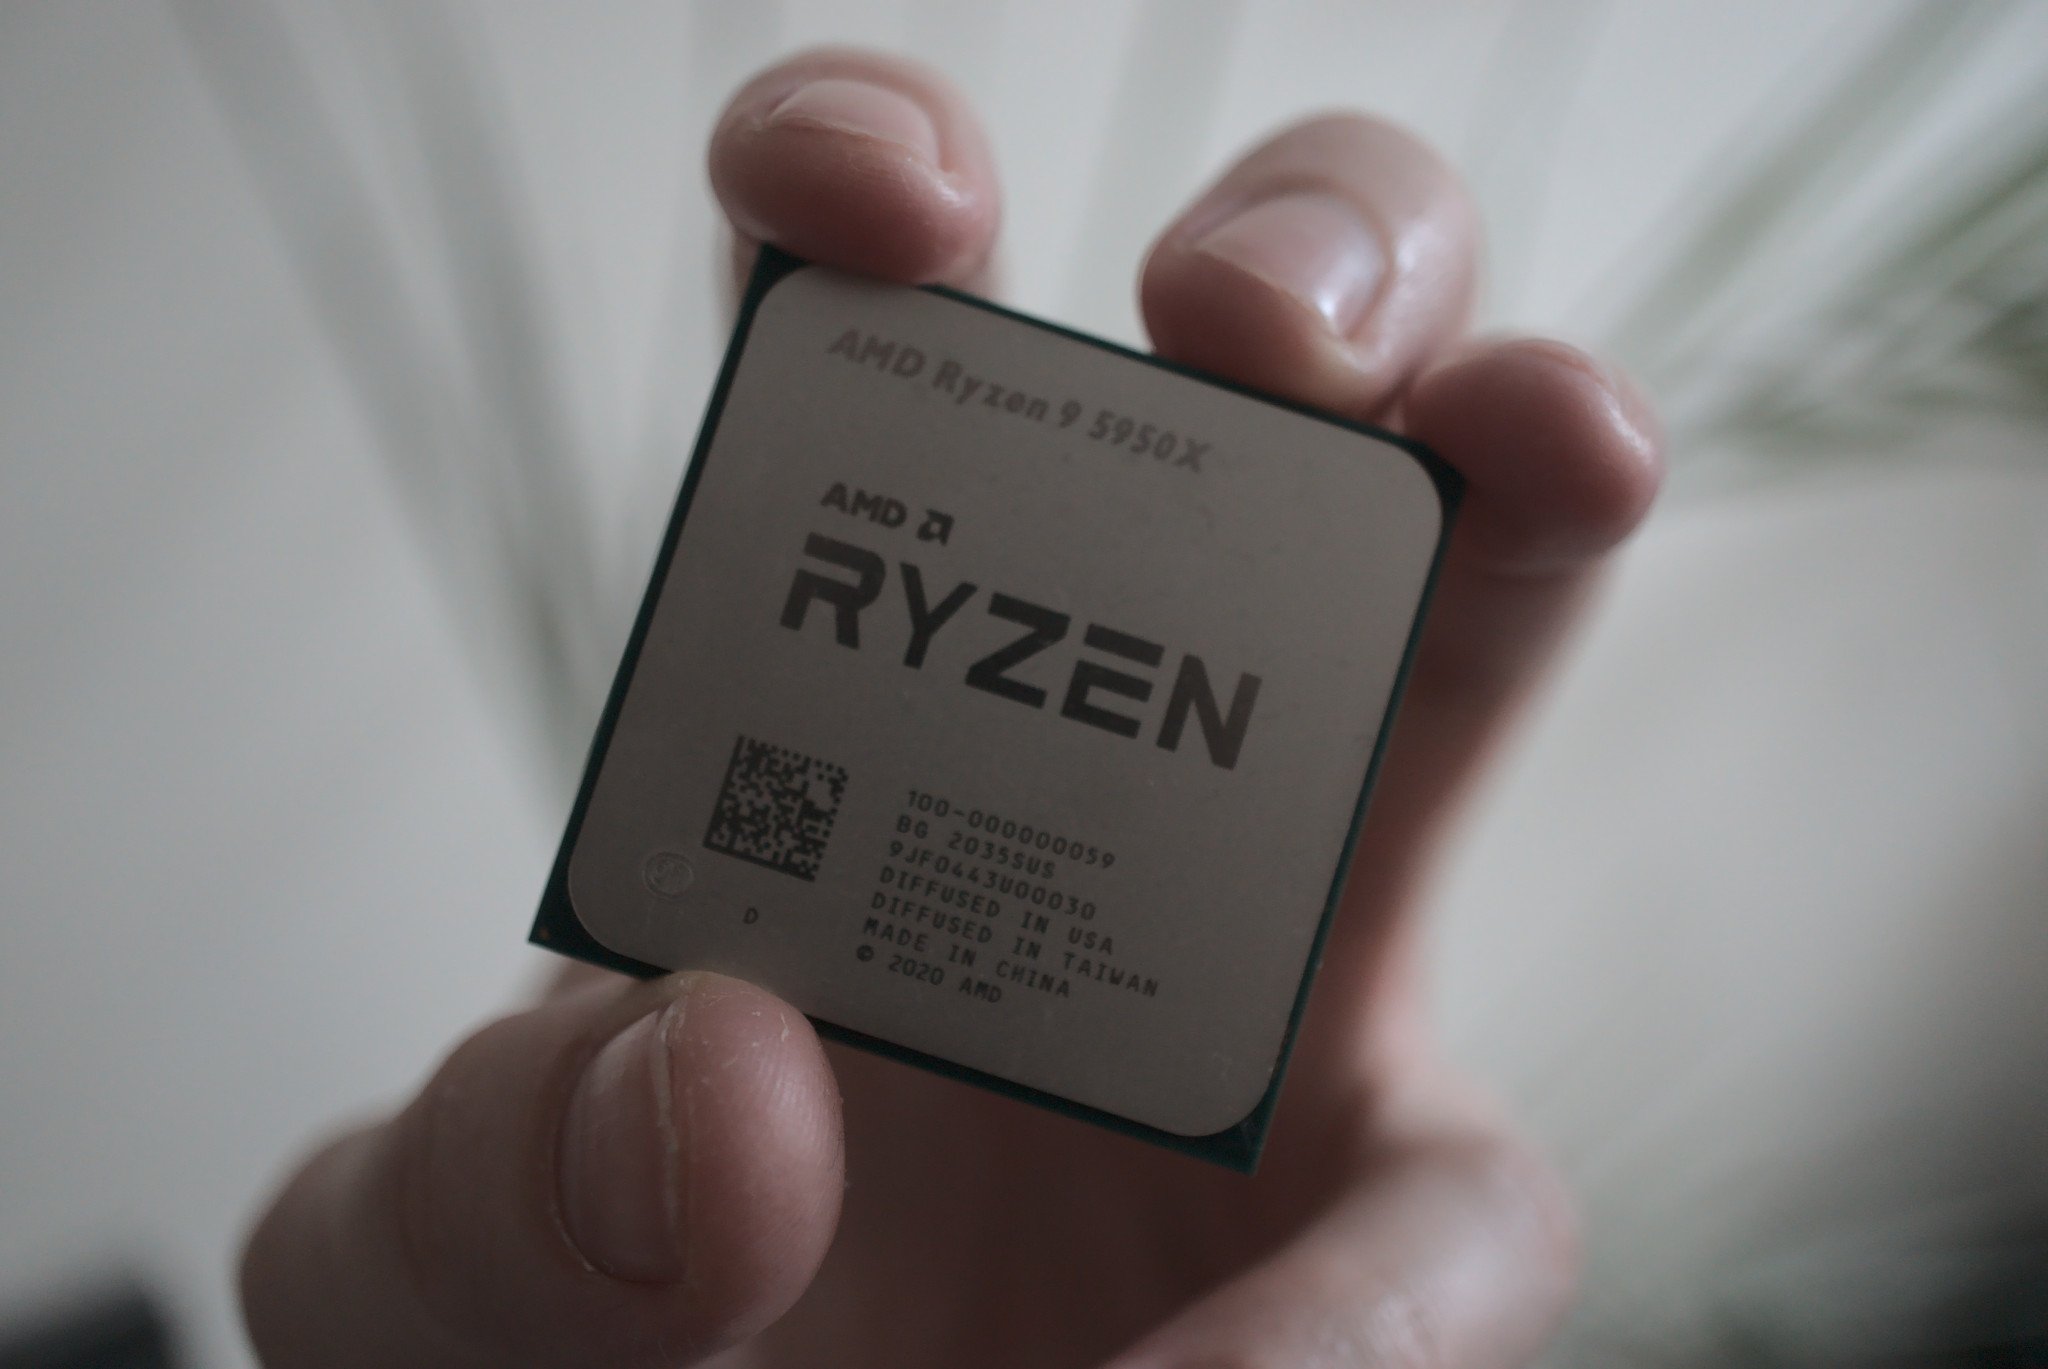 AMD Ryzen 9 5950X review: This monstrous CPU is overkill for 